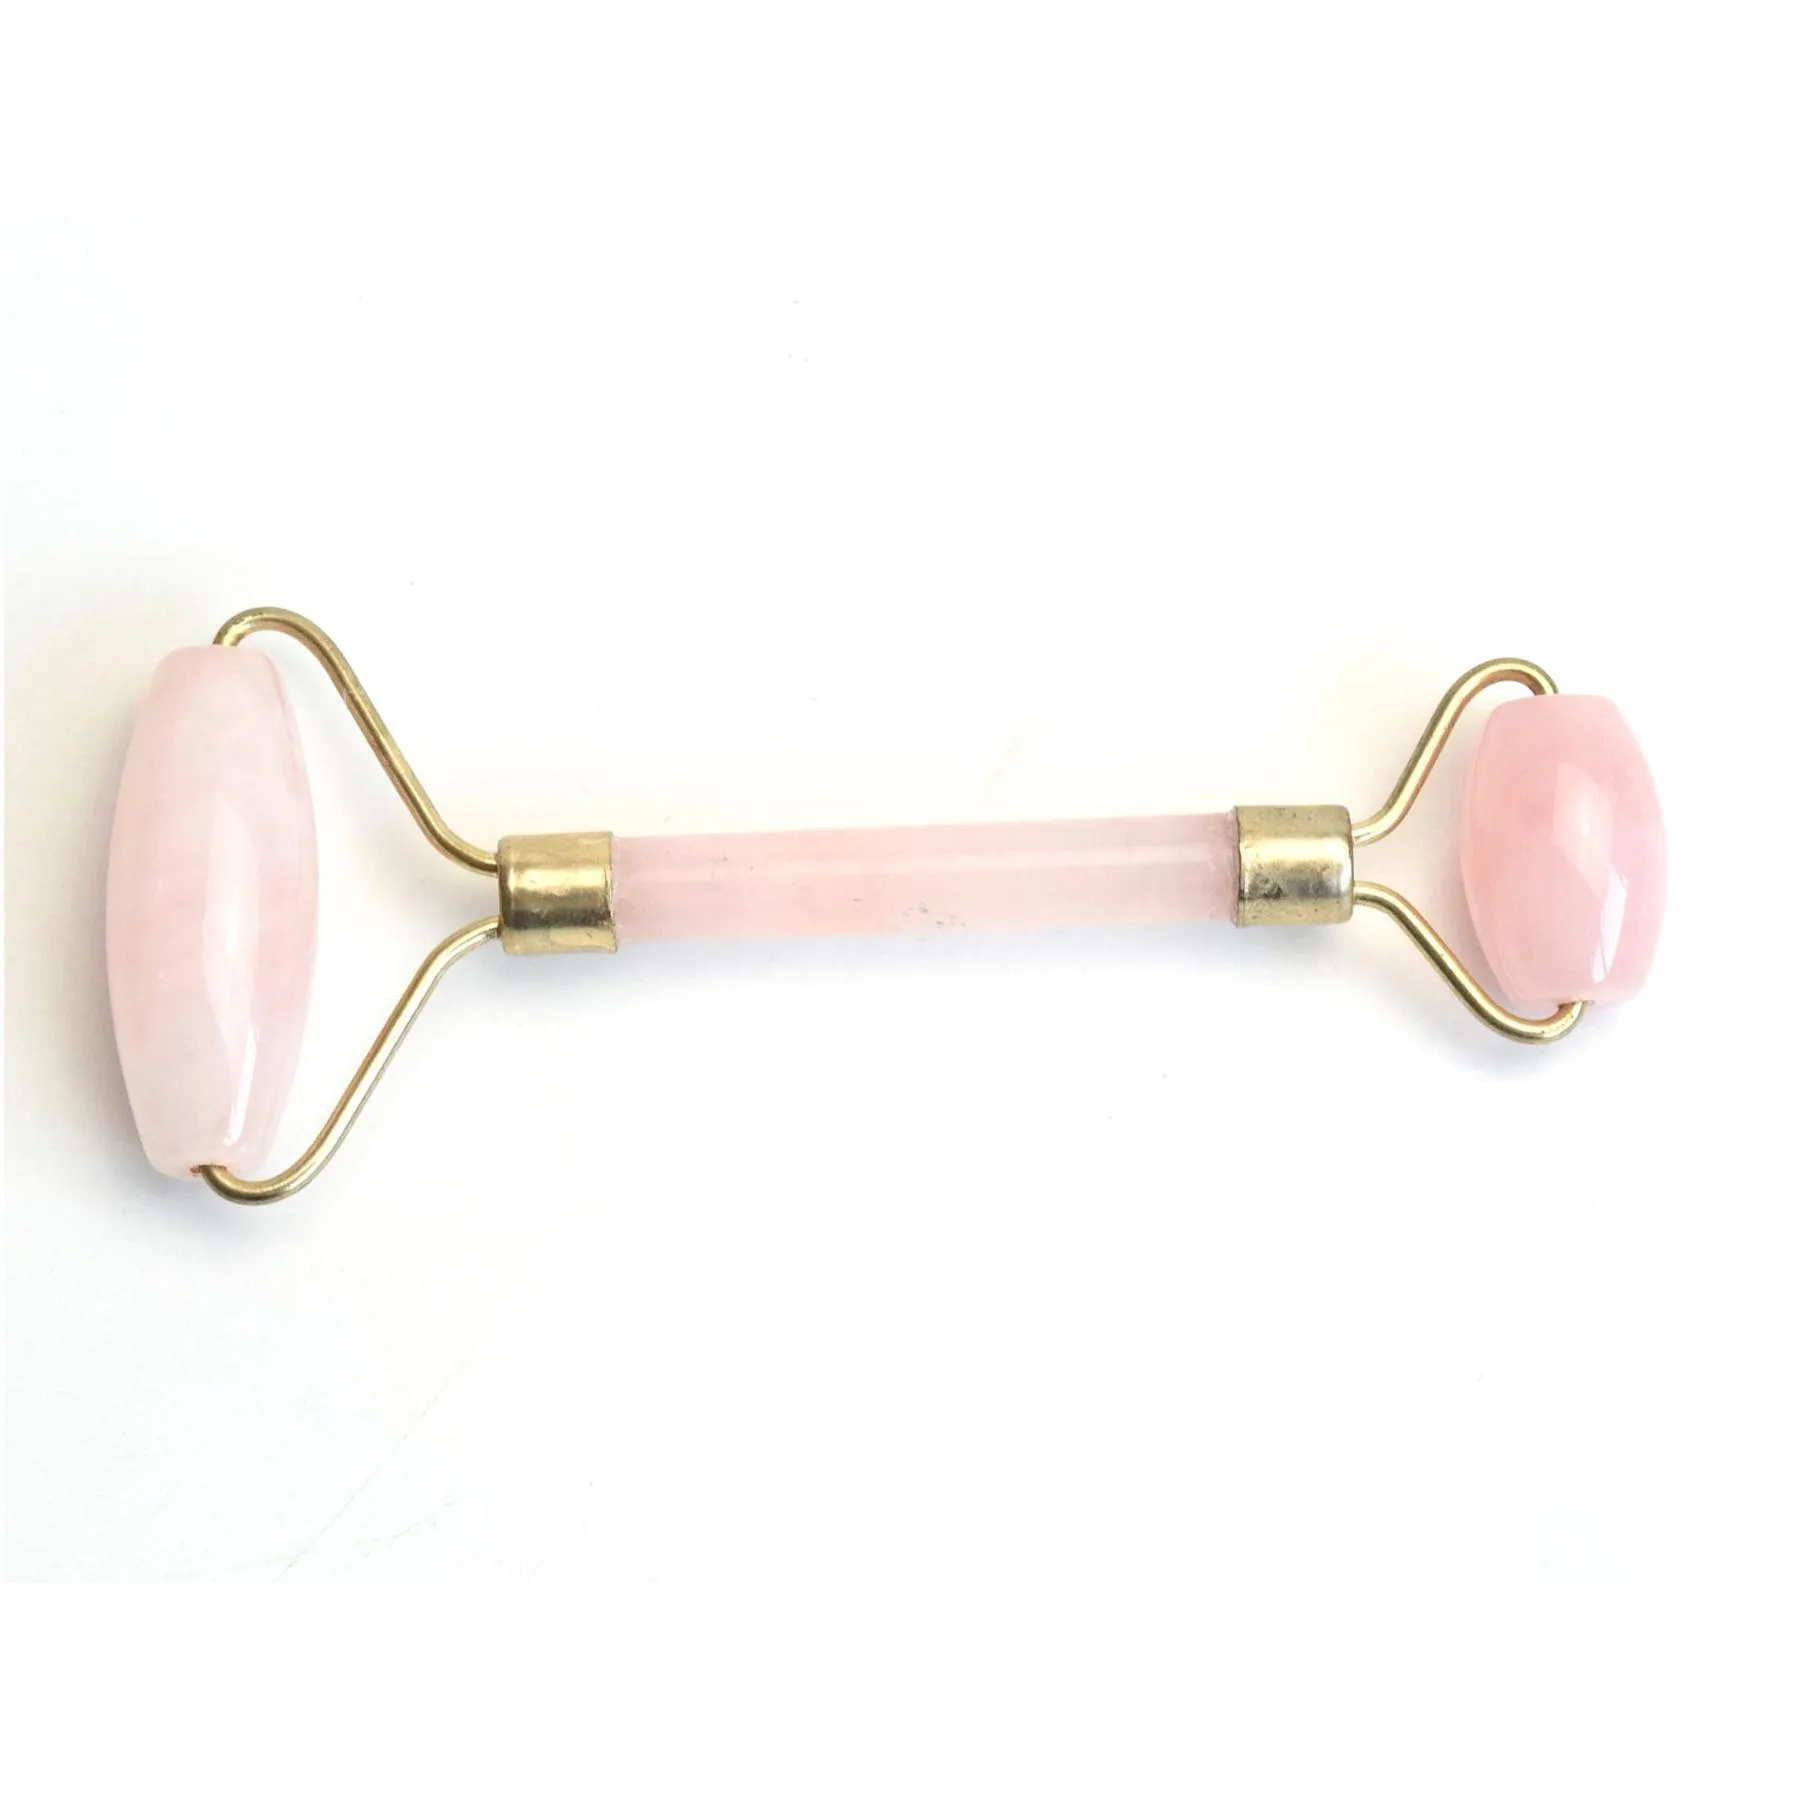 Natural Chakra Rose Quartz Carved Reiki Crystal Healing Gua Sha Beauty Roller Facial Massor Stick with Alloy Gold-Plated